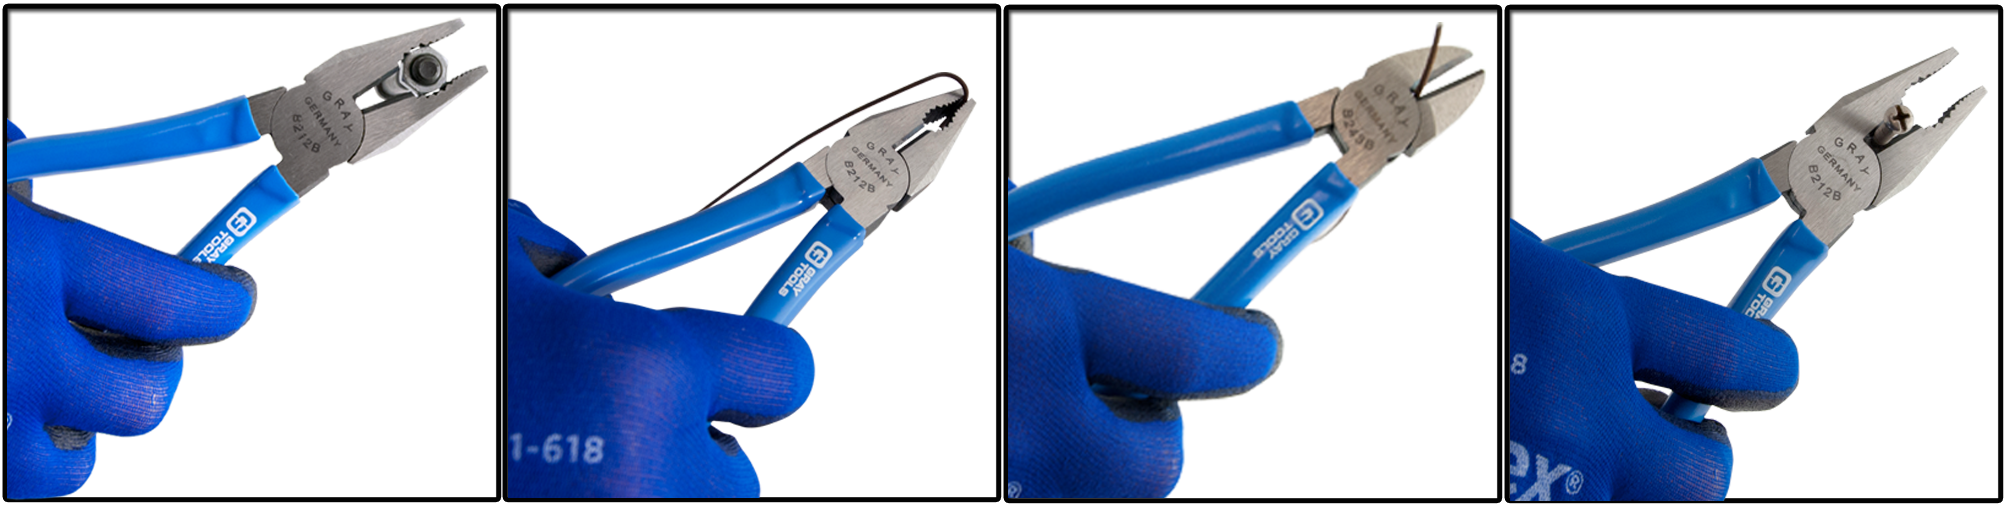 Pliers functionality